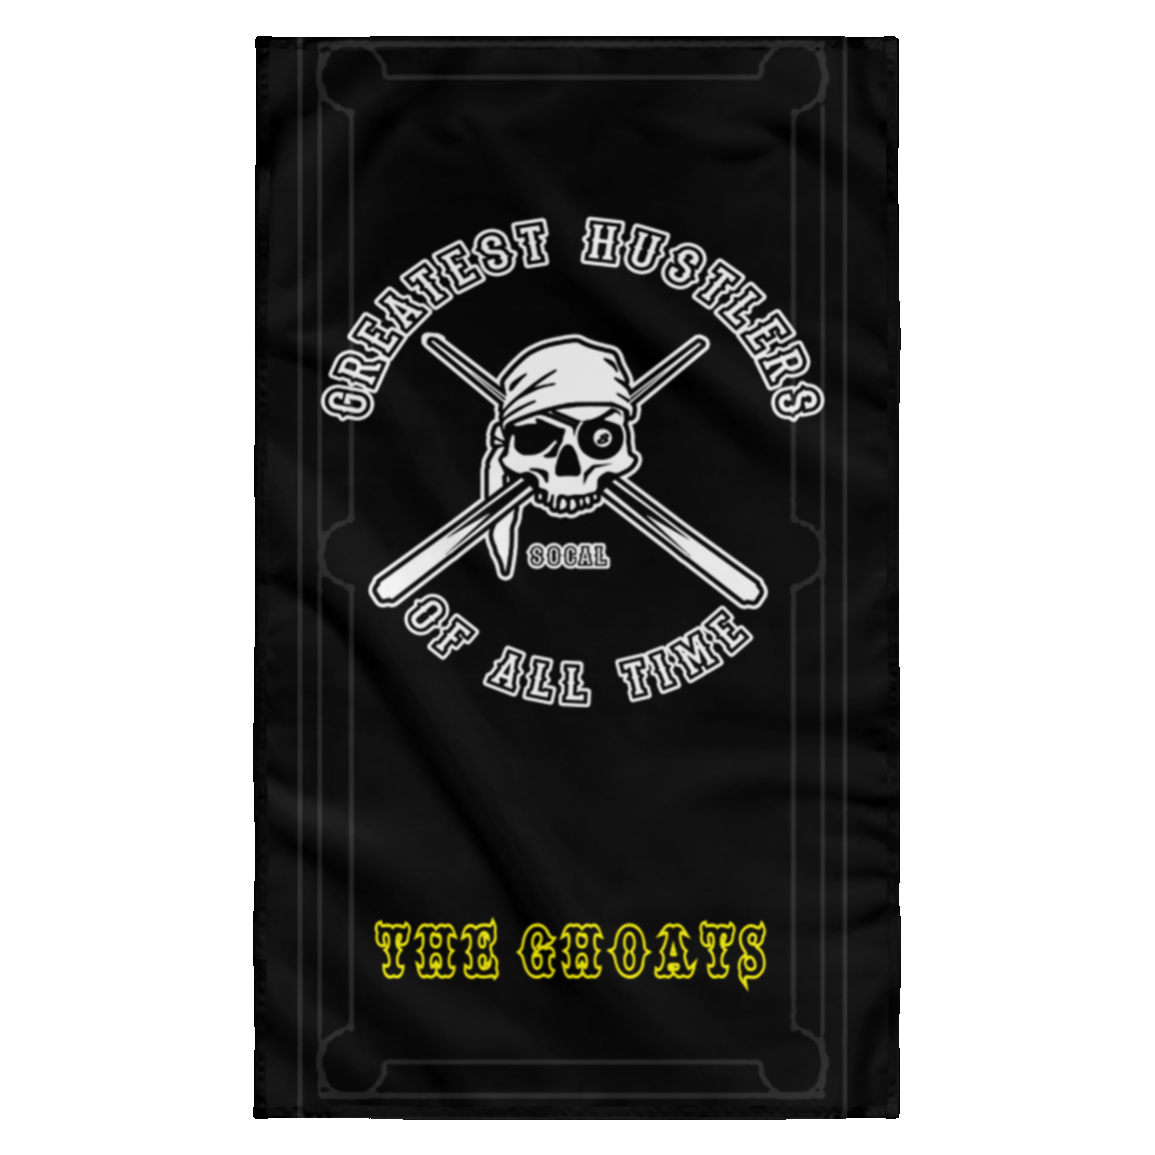 The GHOATS Custom Design. #4 Motorcycle Club Style. Ver 1/2. Wall Flag